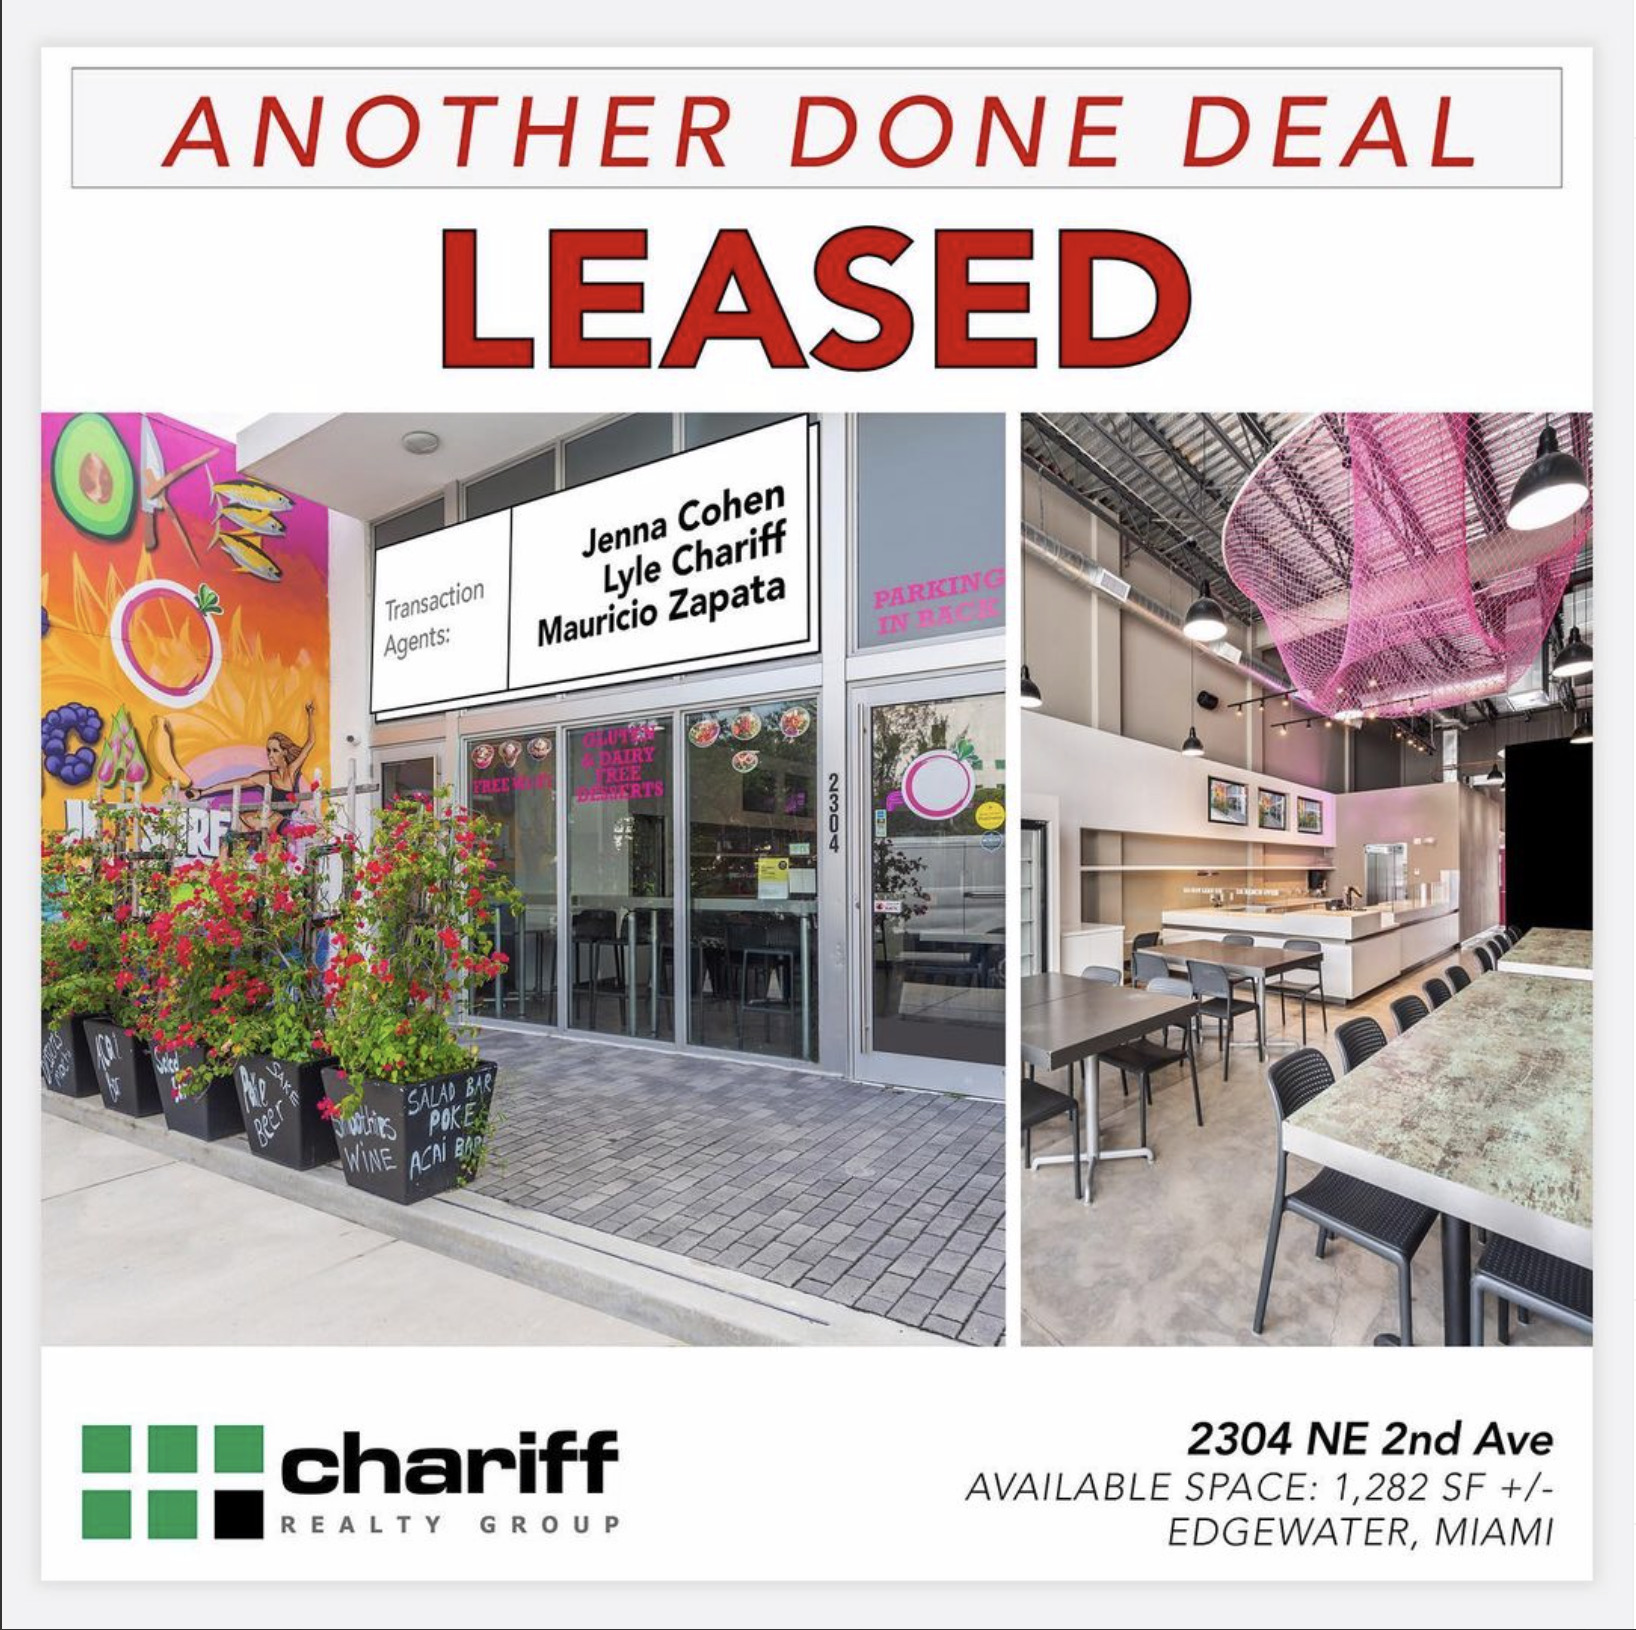 2304 NE 2nd Ave - Edgewater, Miami, Another Done Deal Leased, Chariff Realty Group